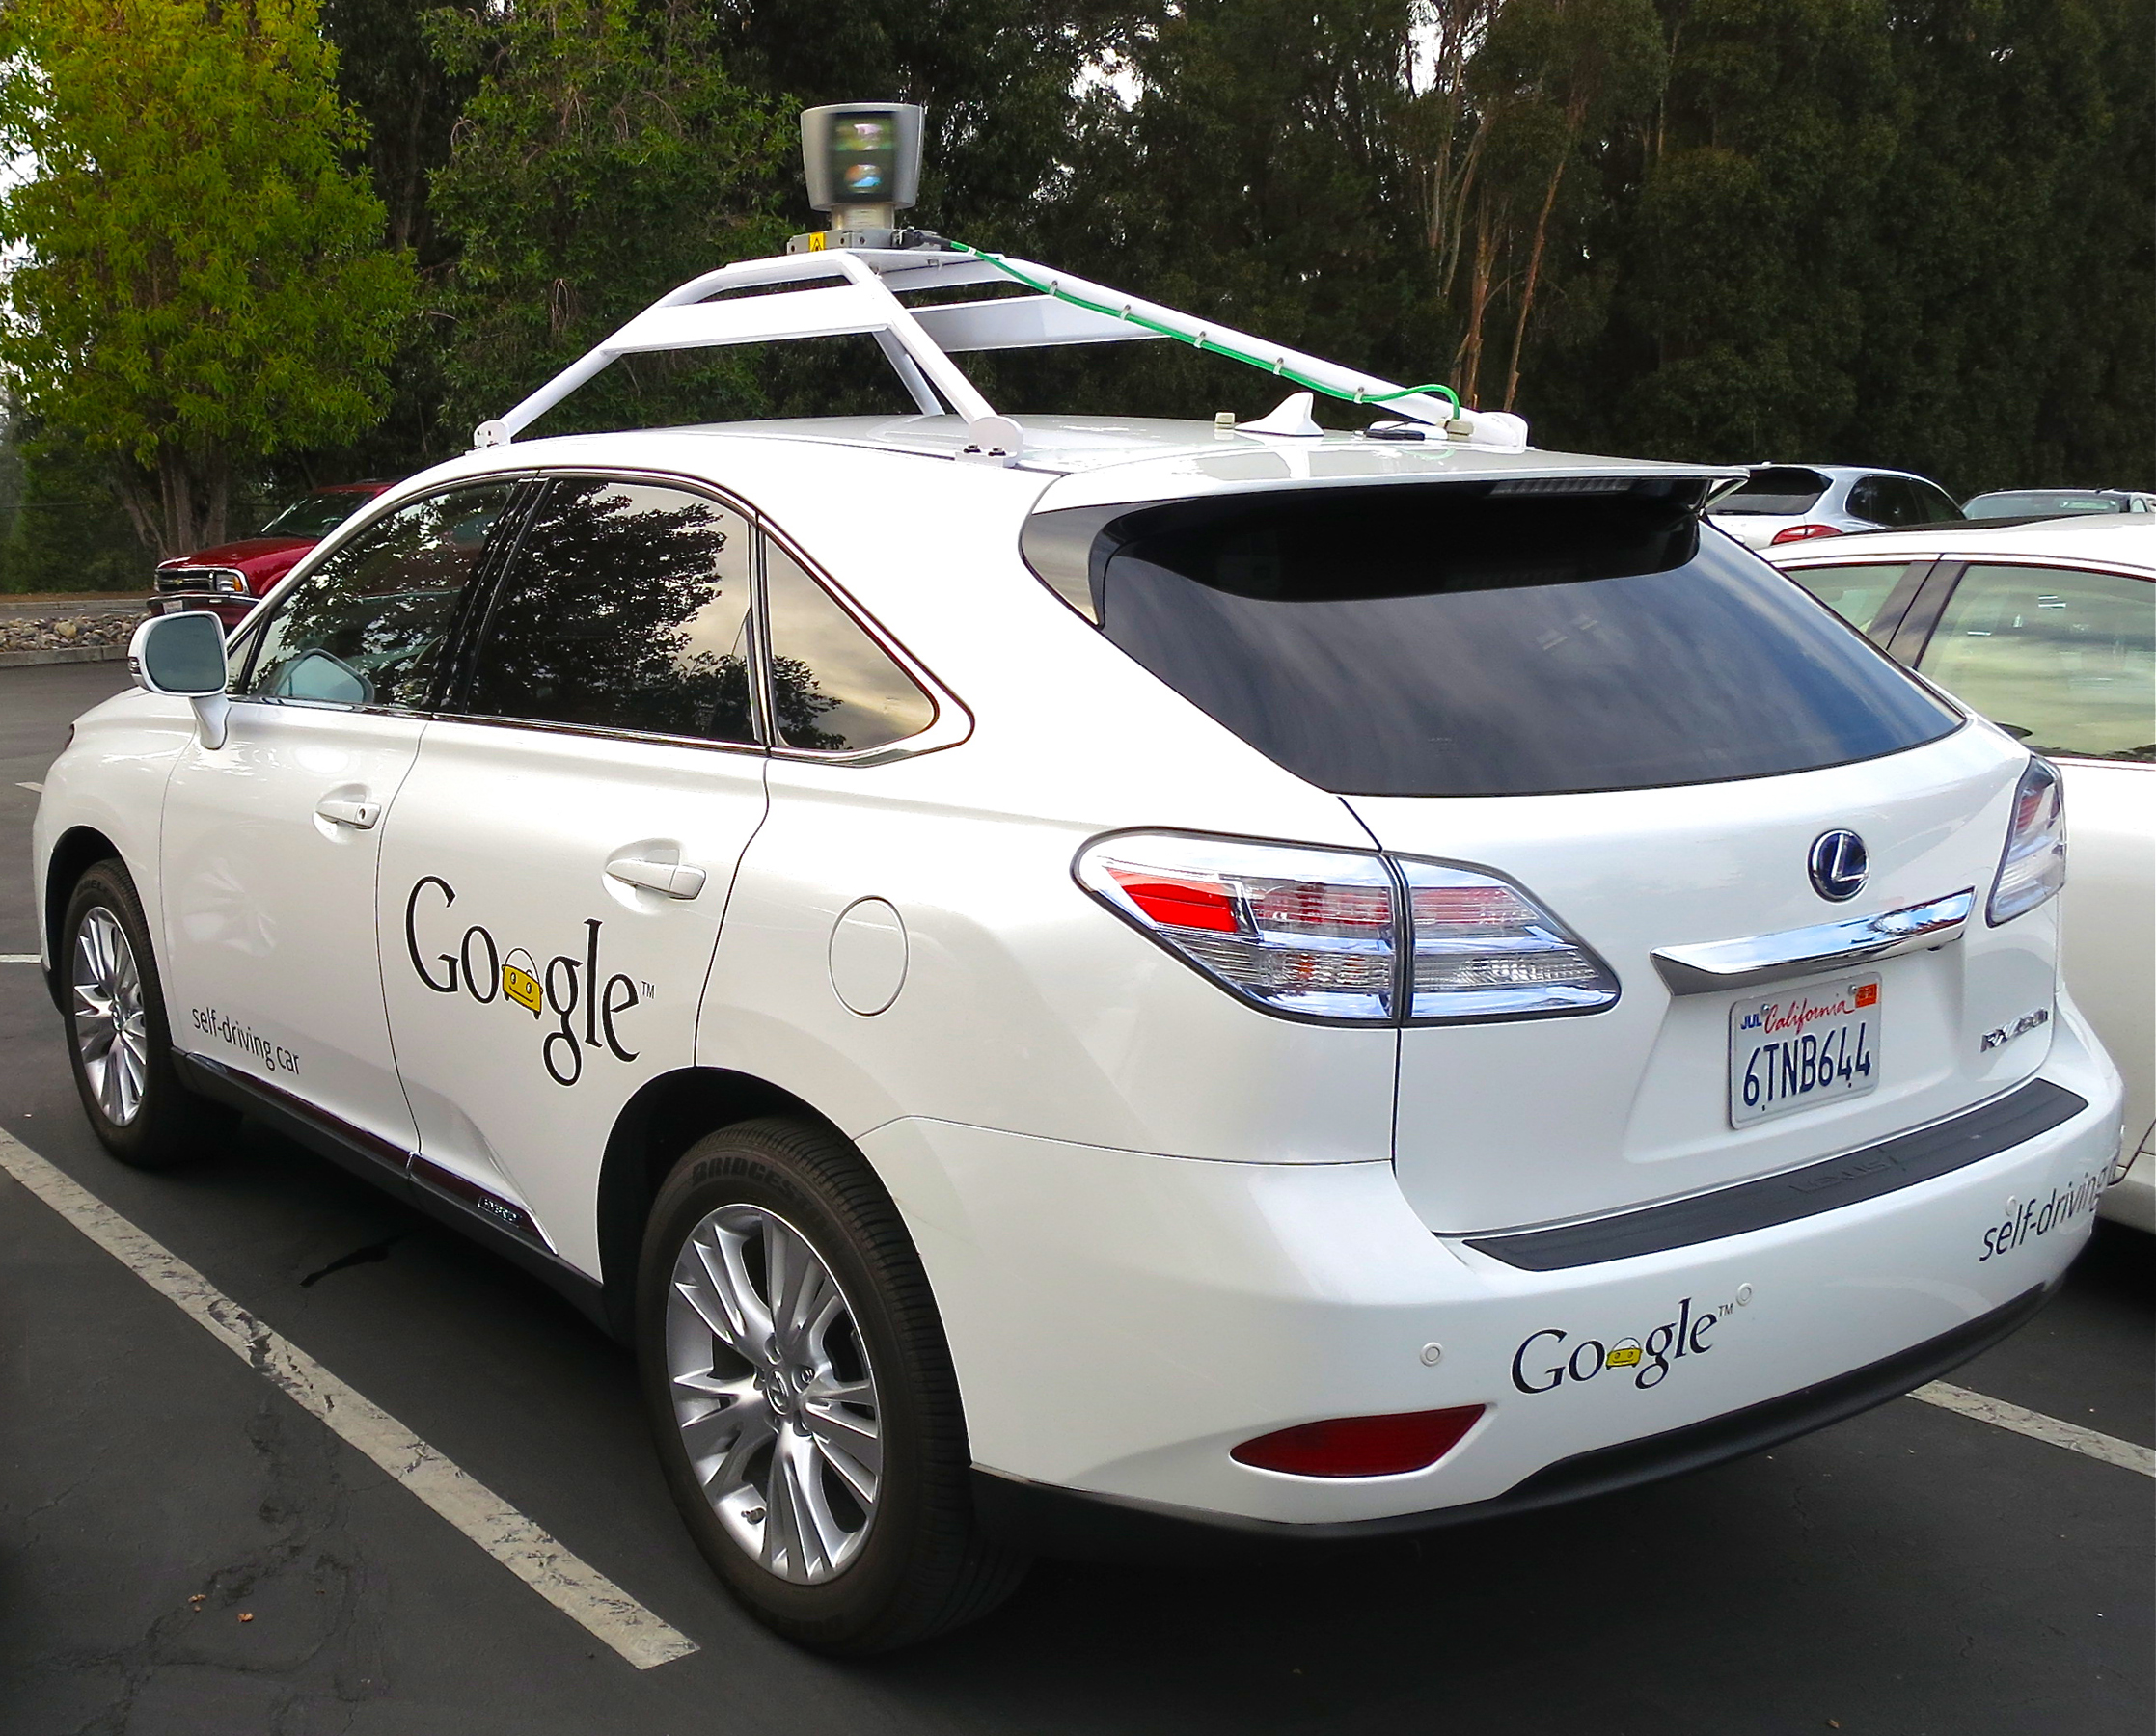 Self driving vehicle sales set to reach 21 Million globally by 2035, IHS Says